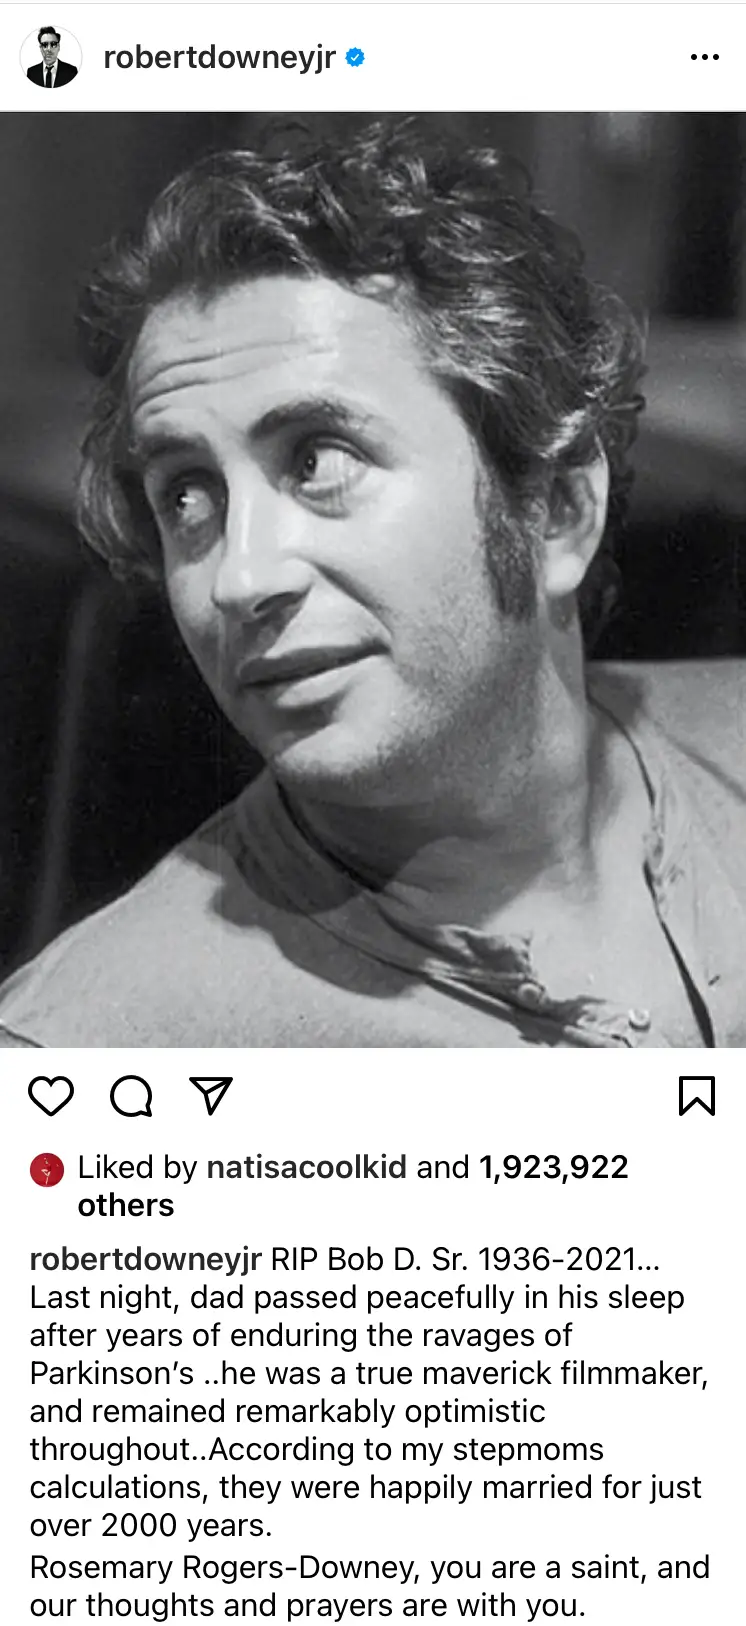 RDJ Post about RDS